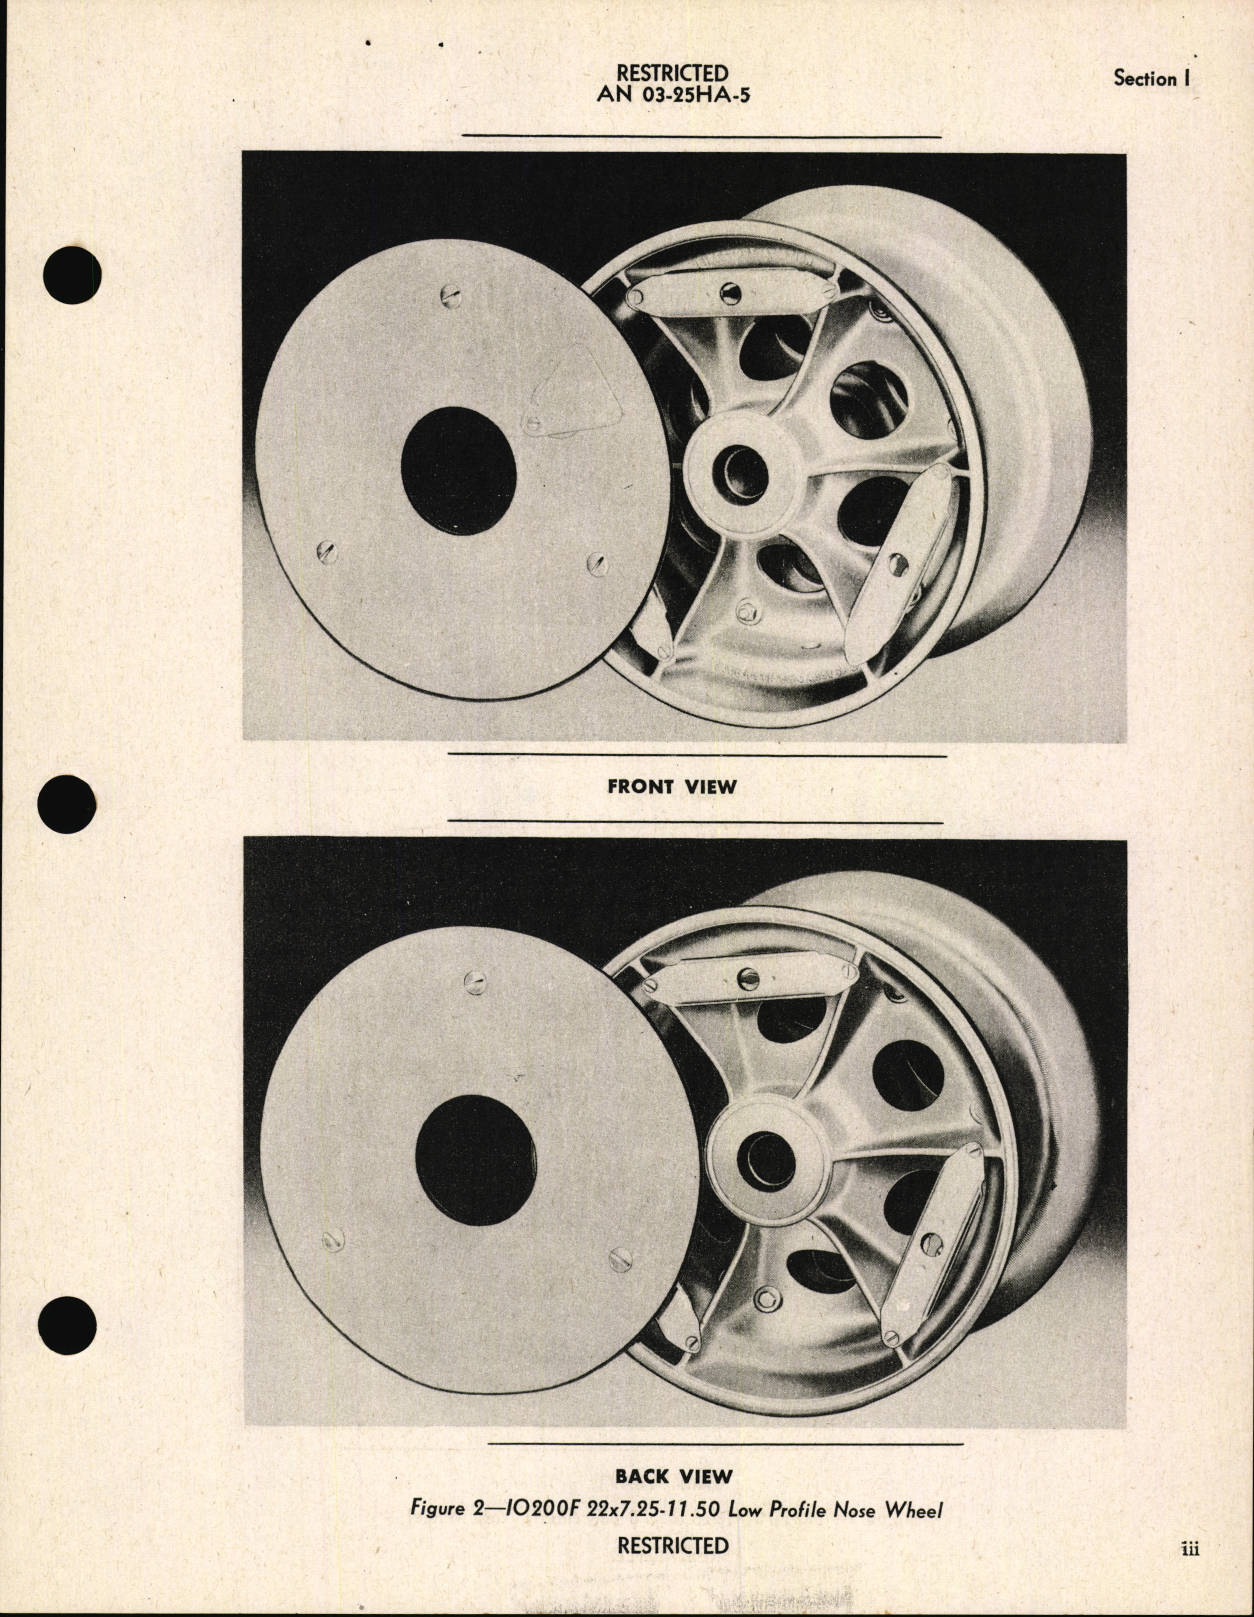 Sample page 5 from AirCorps Library document: Handbook of Instructions with Parts Catalog for Nose Wheels